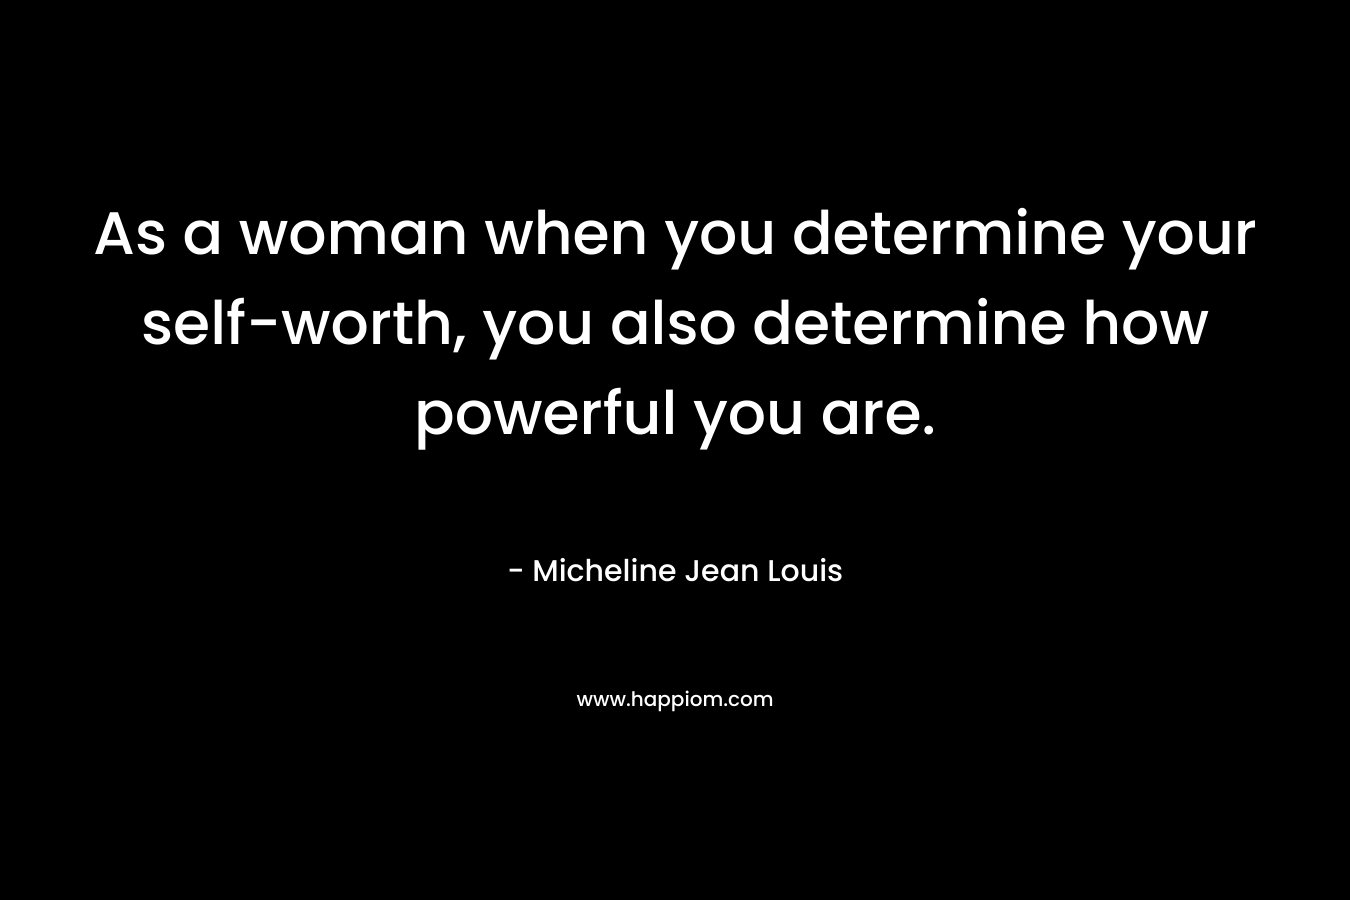 As a woman when you determine your self-worth, you also determine how powerful you are.